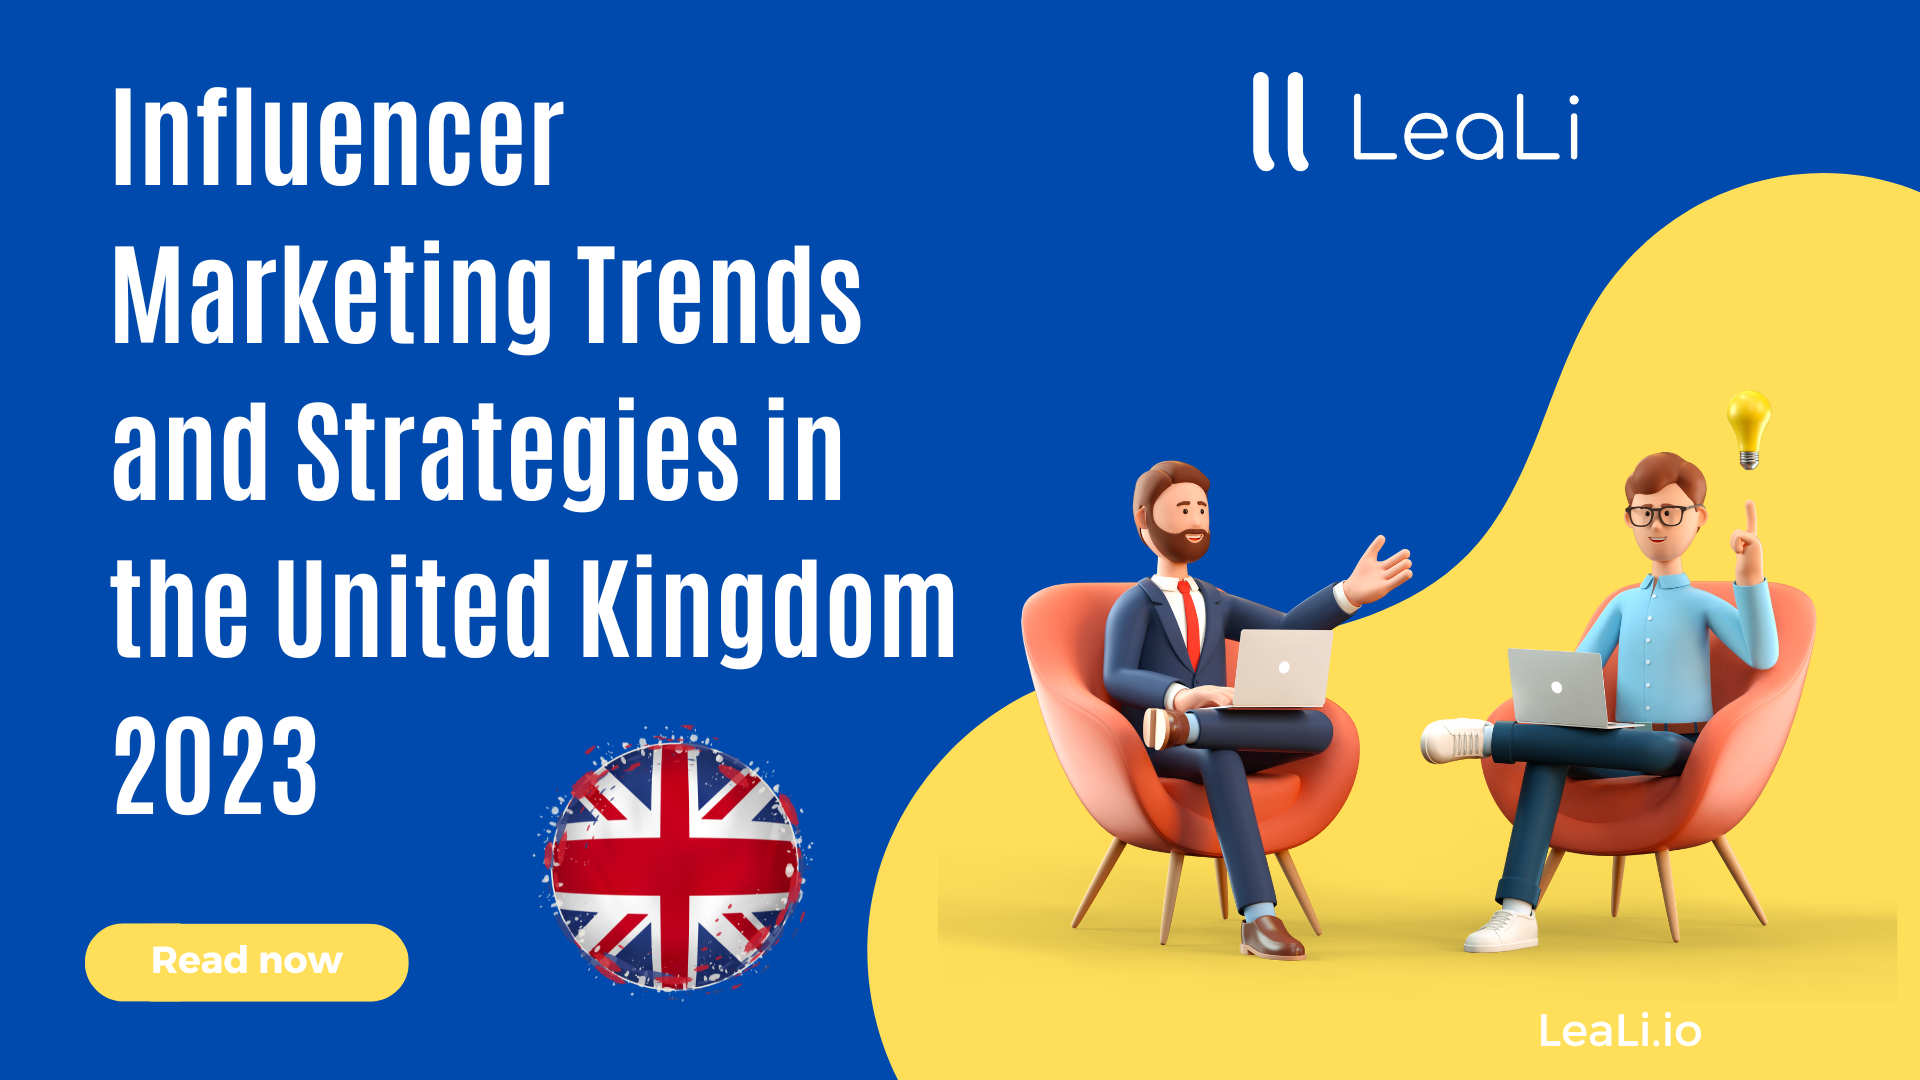 Influencer Marketing Trends and Strategies in the United Kingdom (UK) 2023